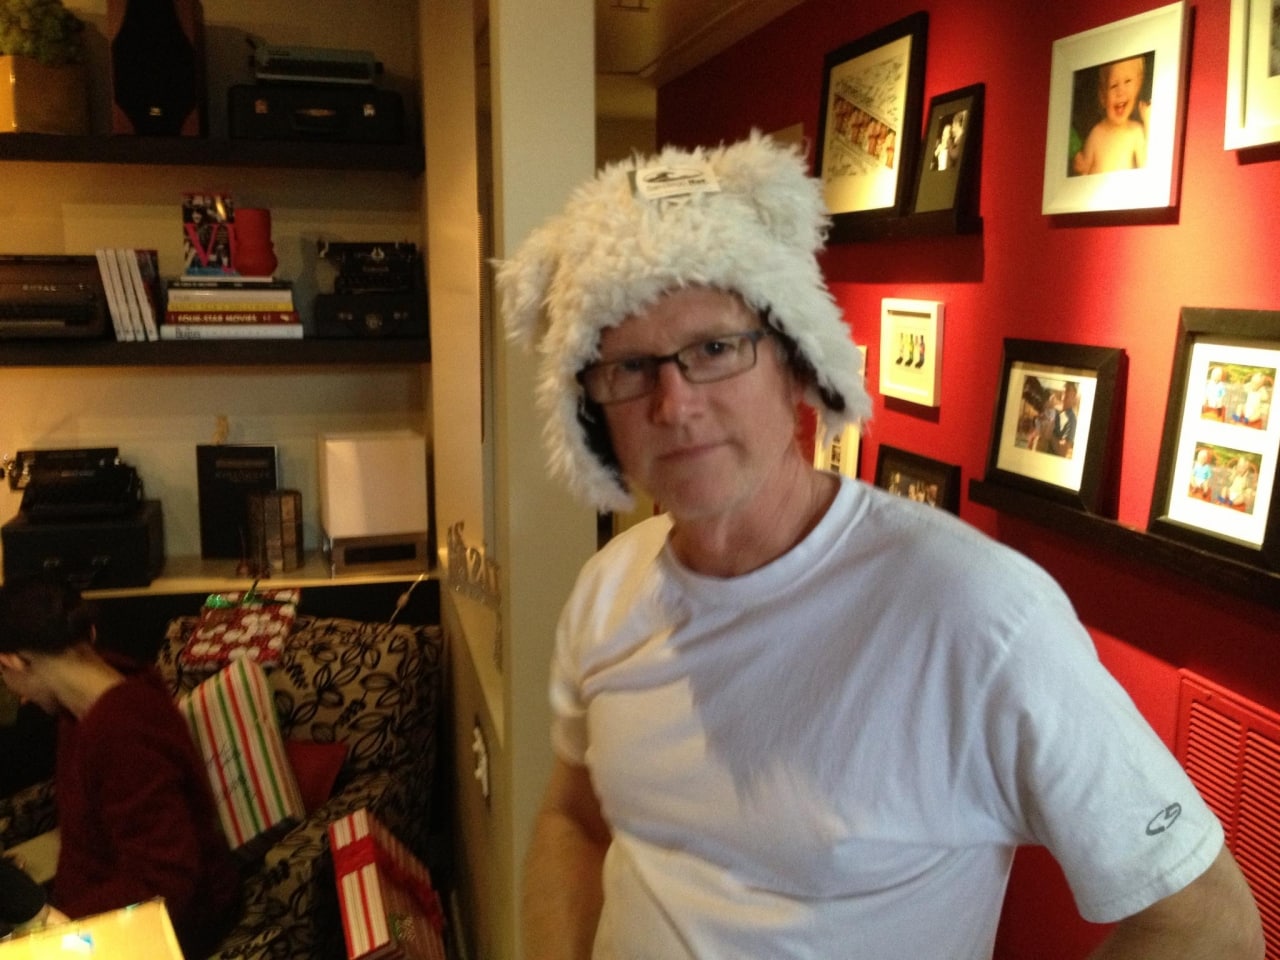 Alan Hunter wearing a silly hat